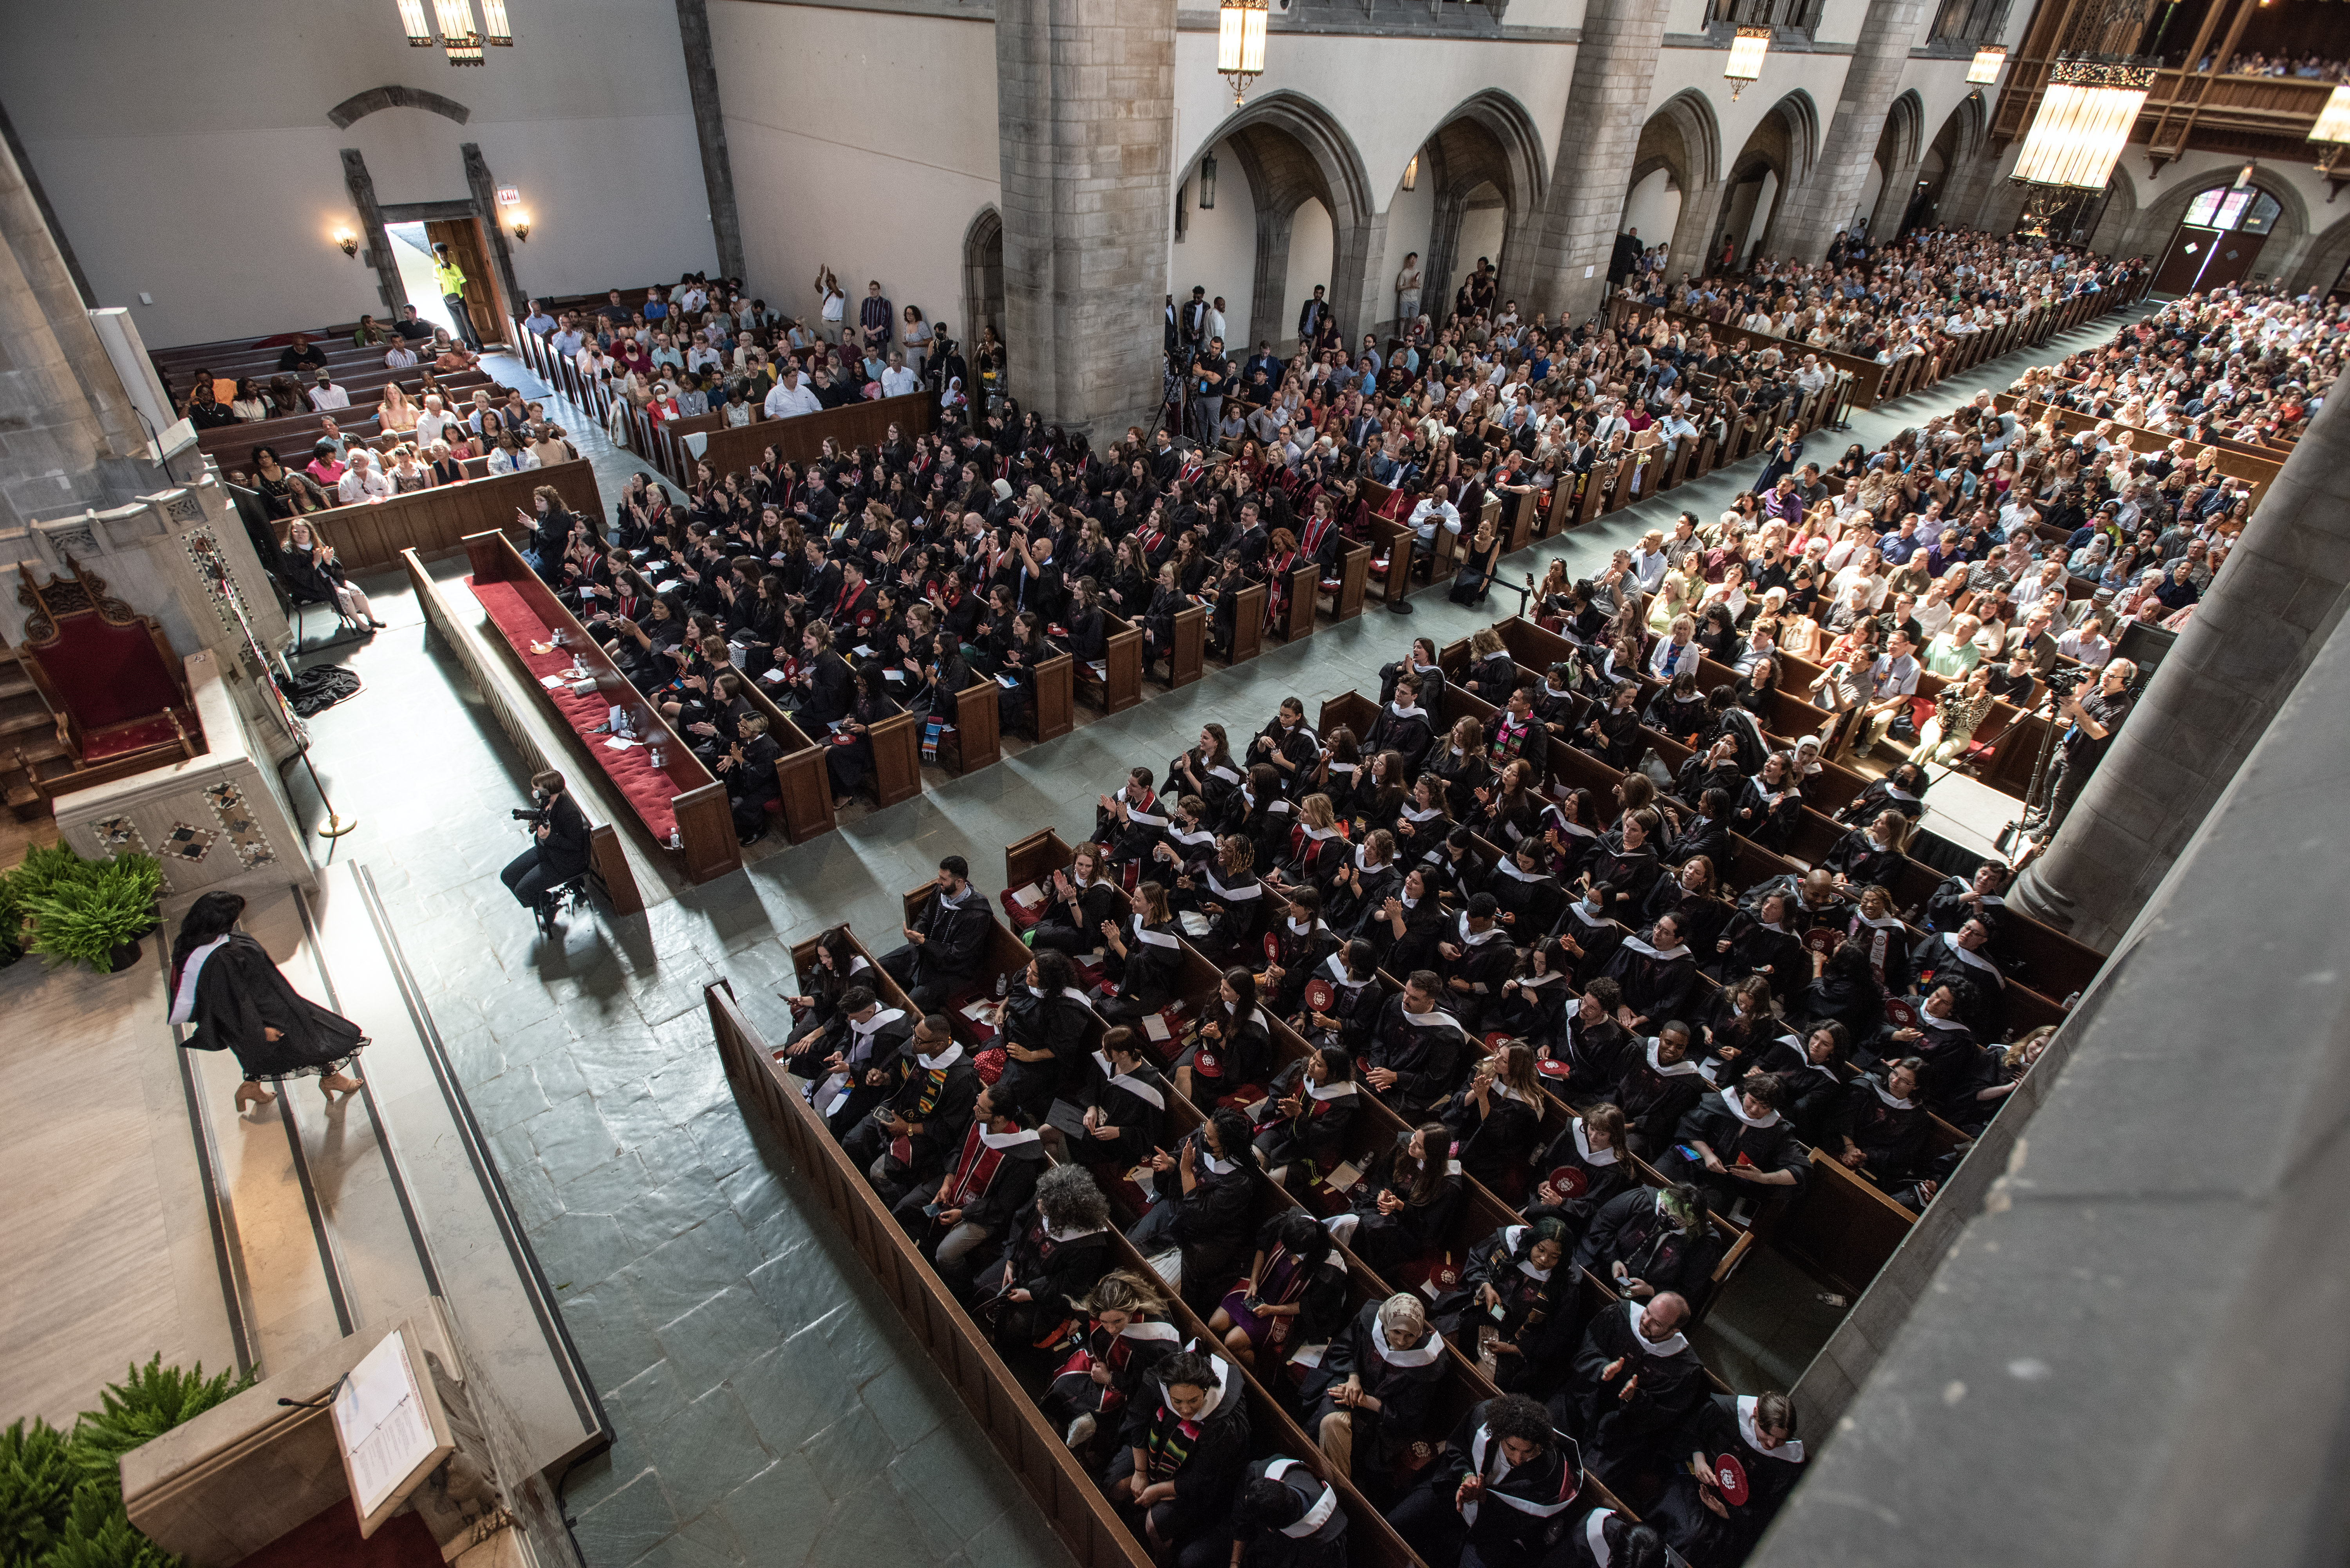 picture from above of a group of people sitting in a church